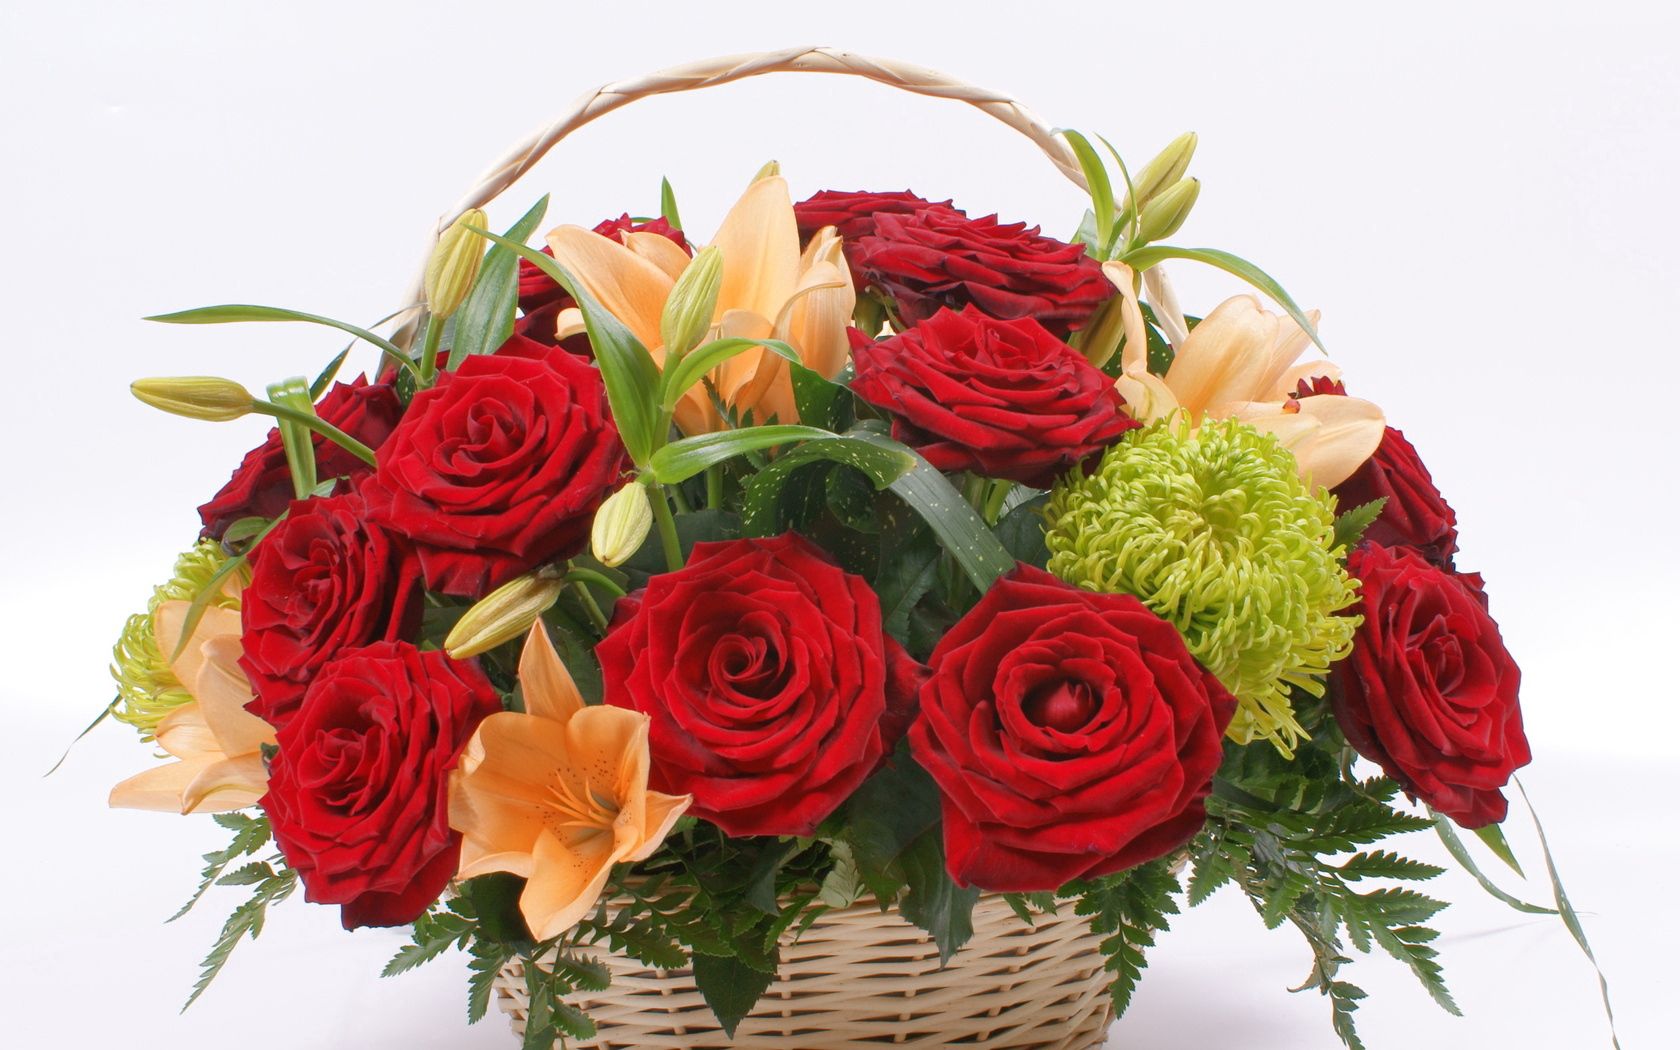 roses, flowers, grass, lilies, basket, composition